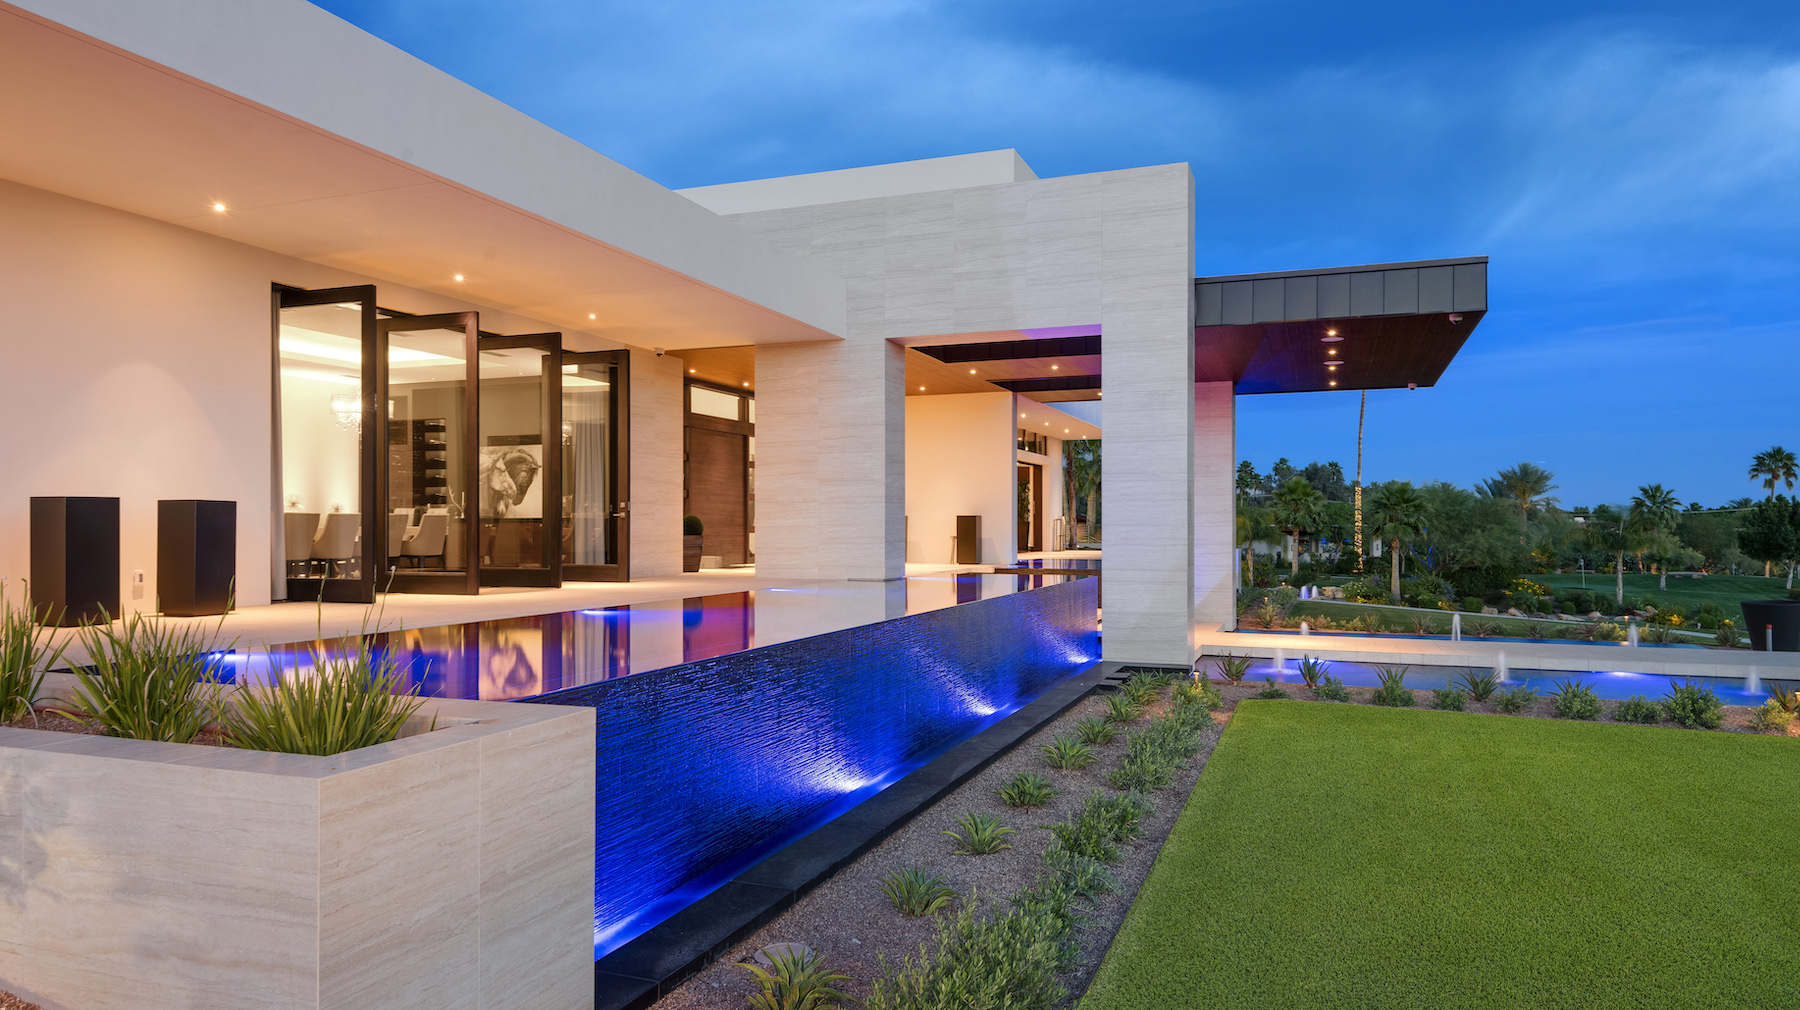 Estate at Camelback Mountain architecture by Drewett Works